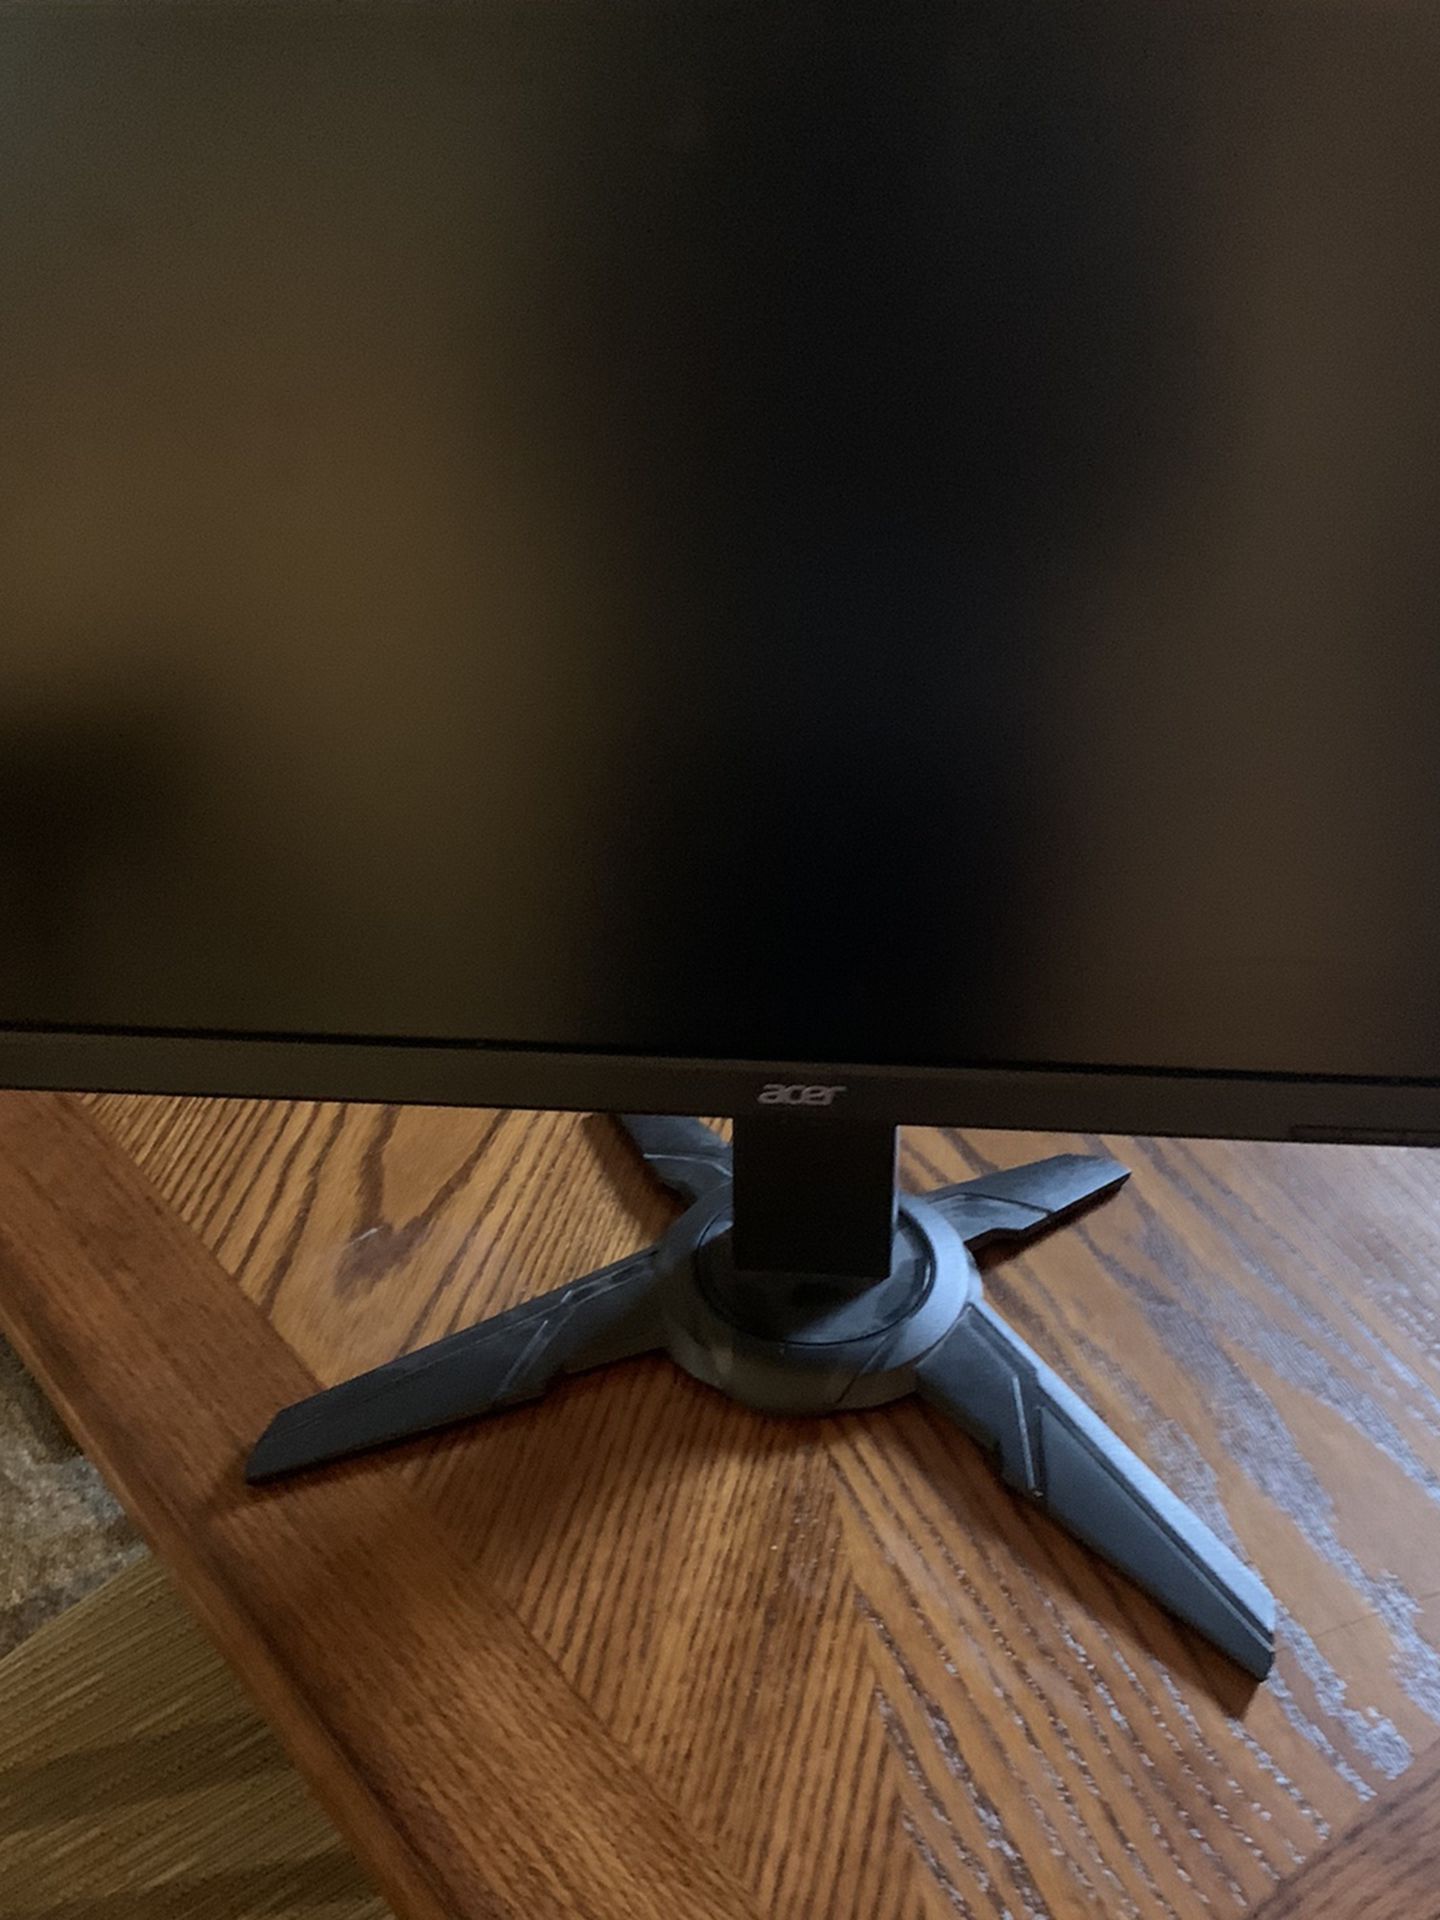 22” Acer HD Monitor